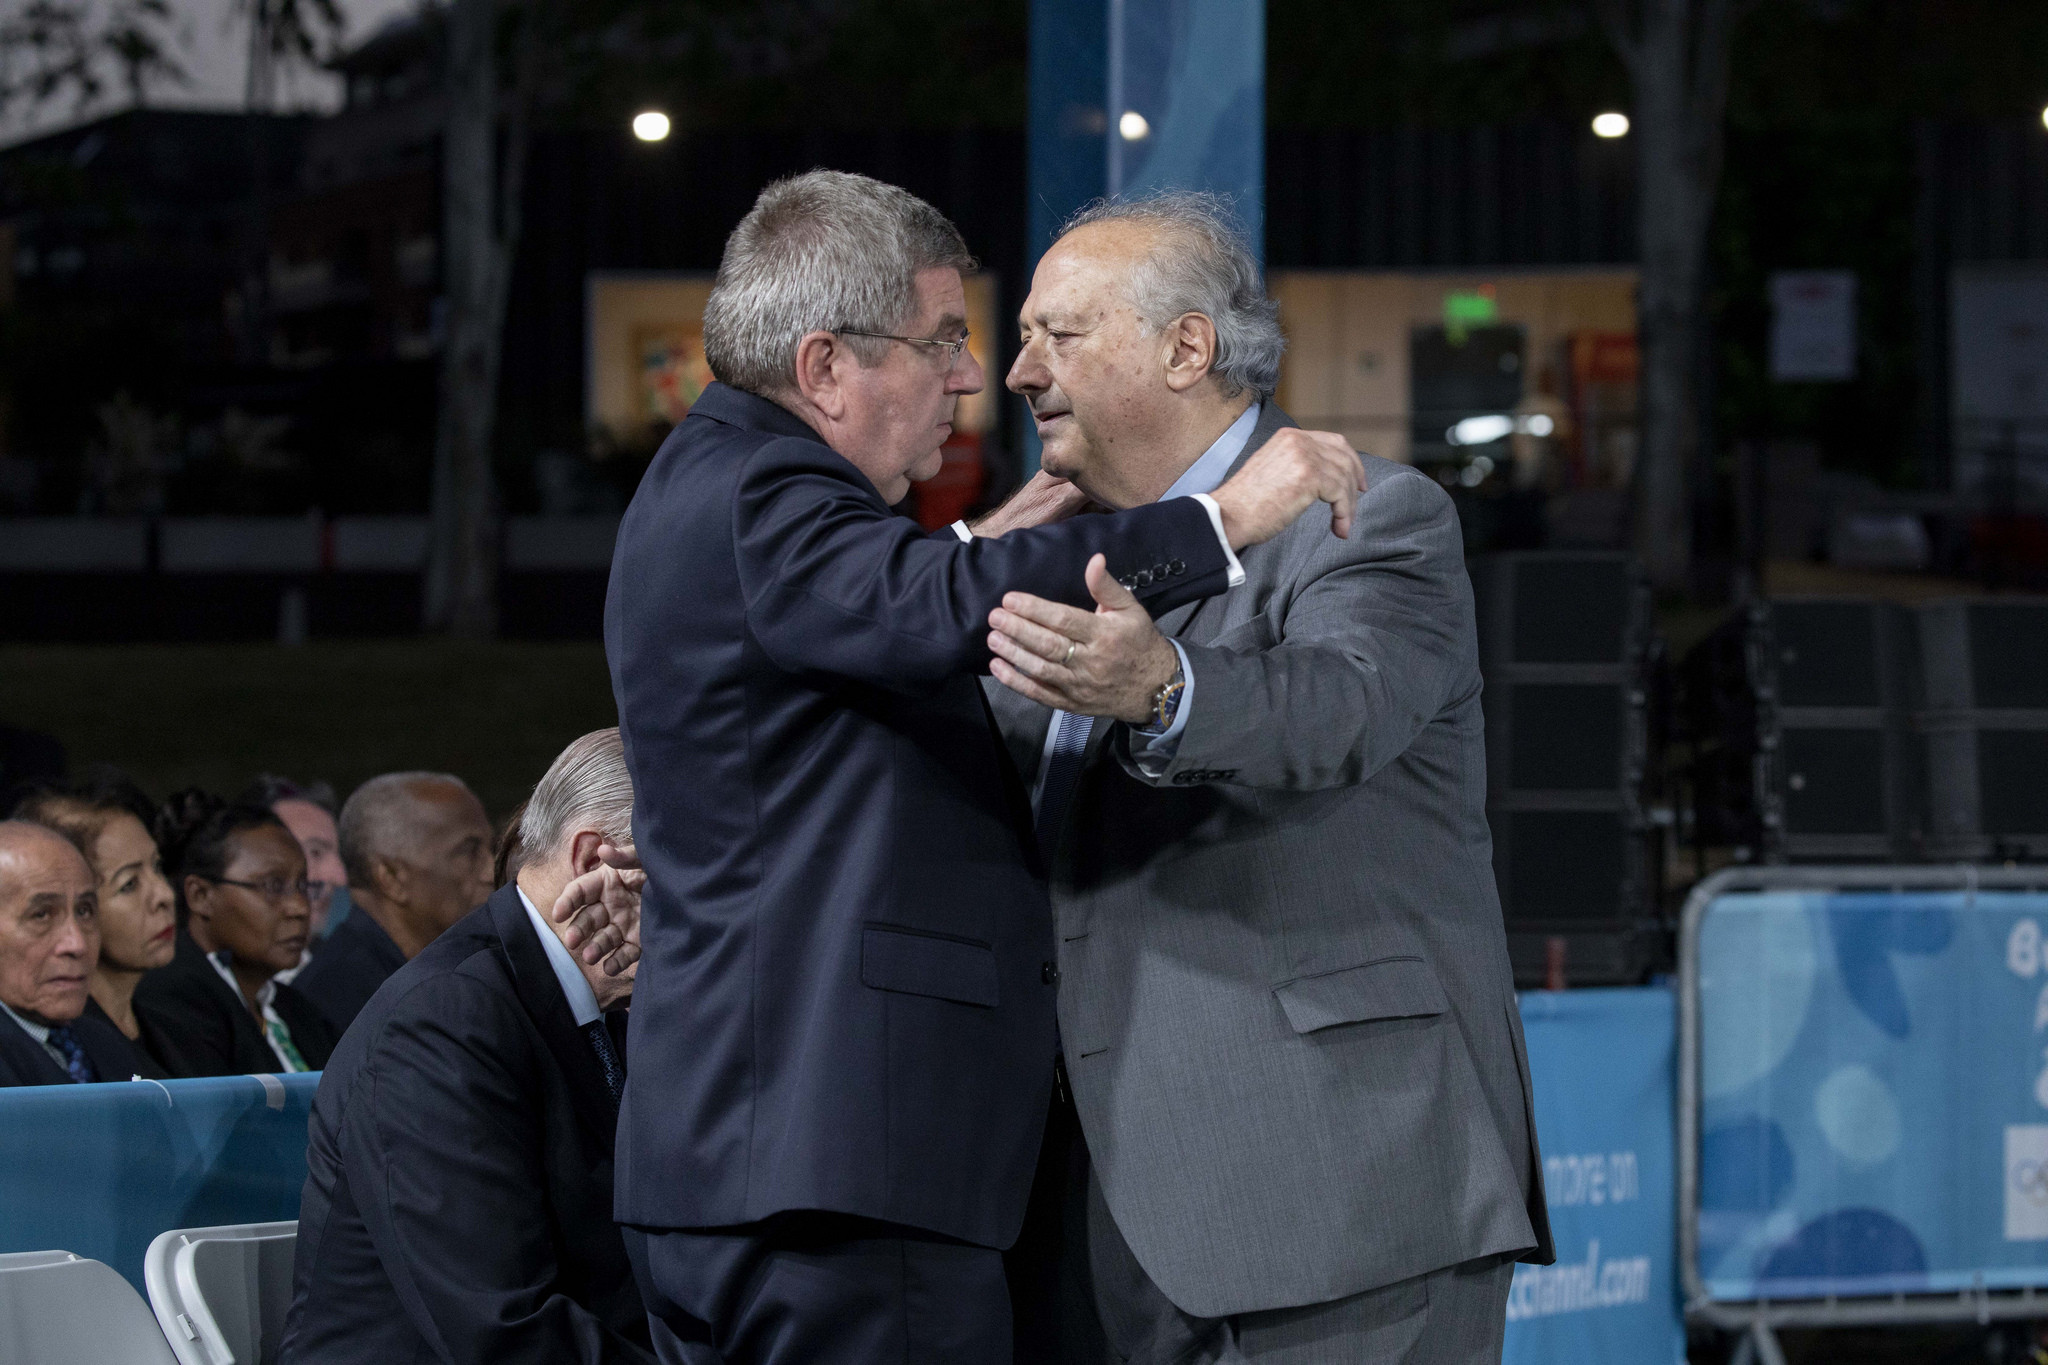 The Presidents of the IOC and FIBA both spoke at a ceremony attended by a host of members and other officials ©IOC